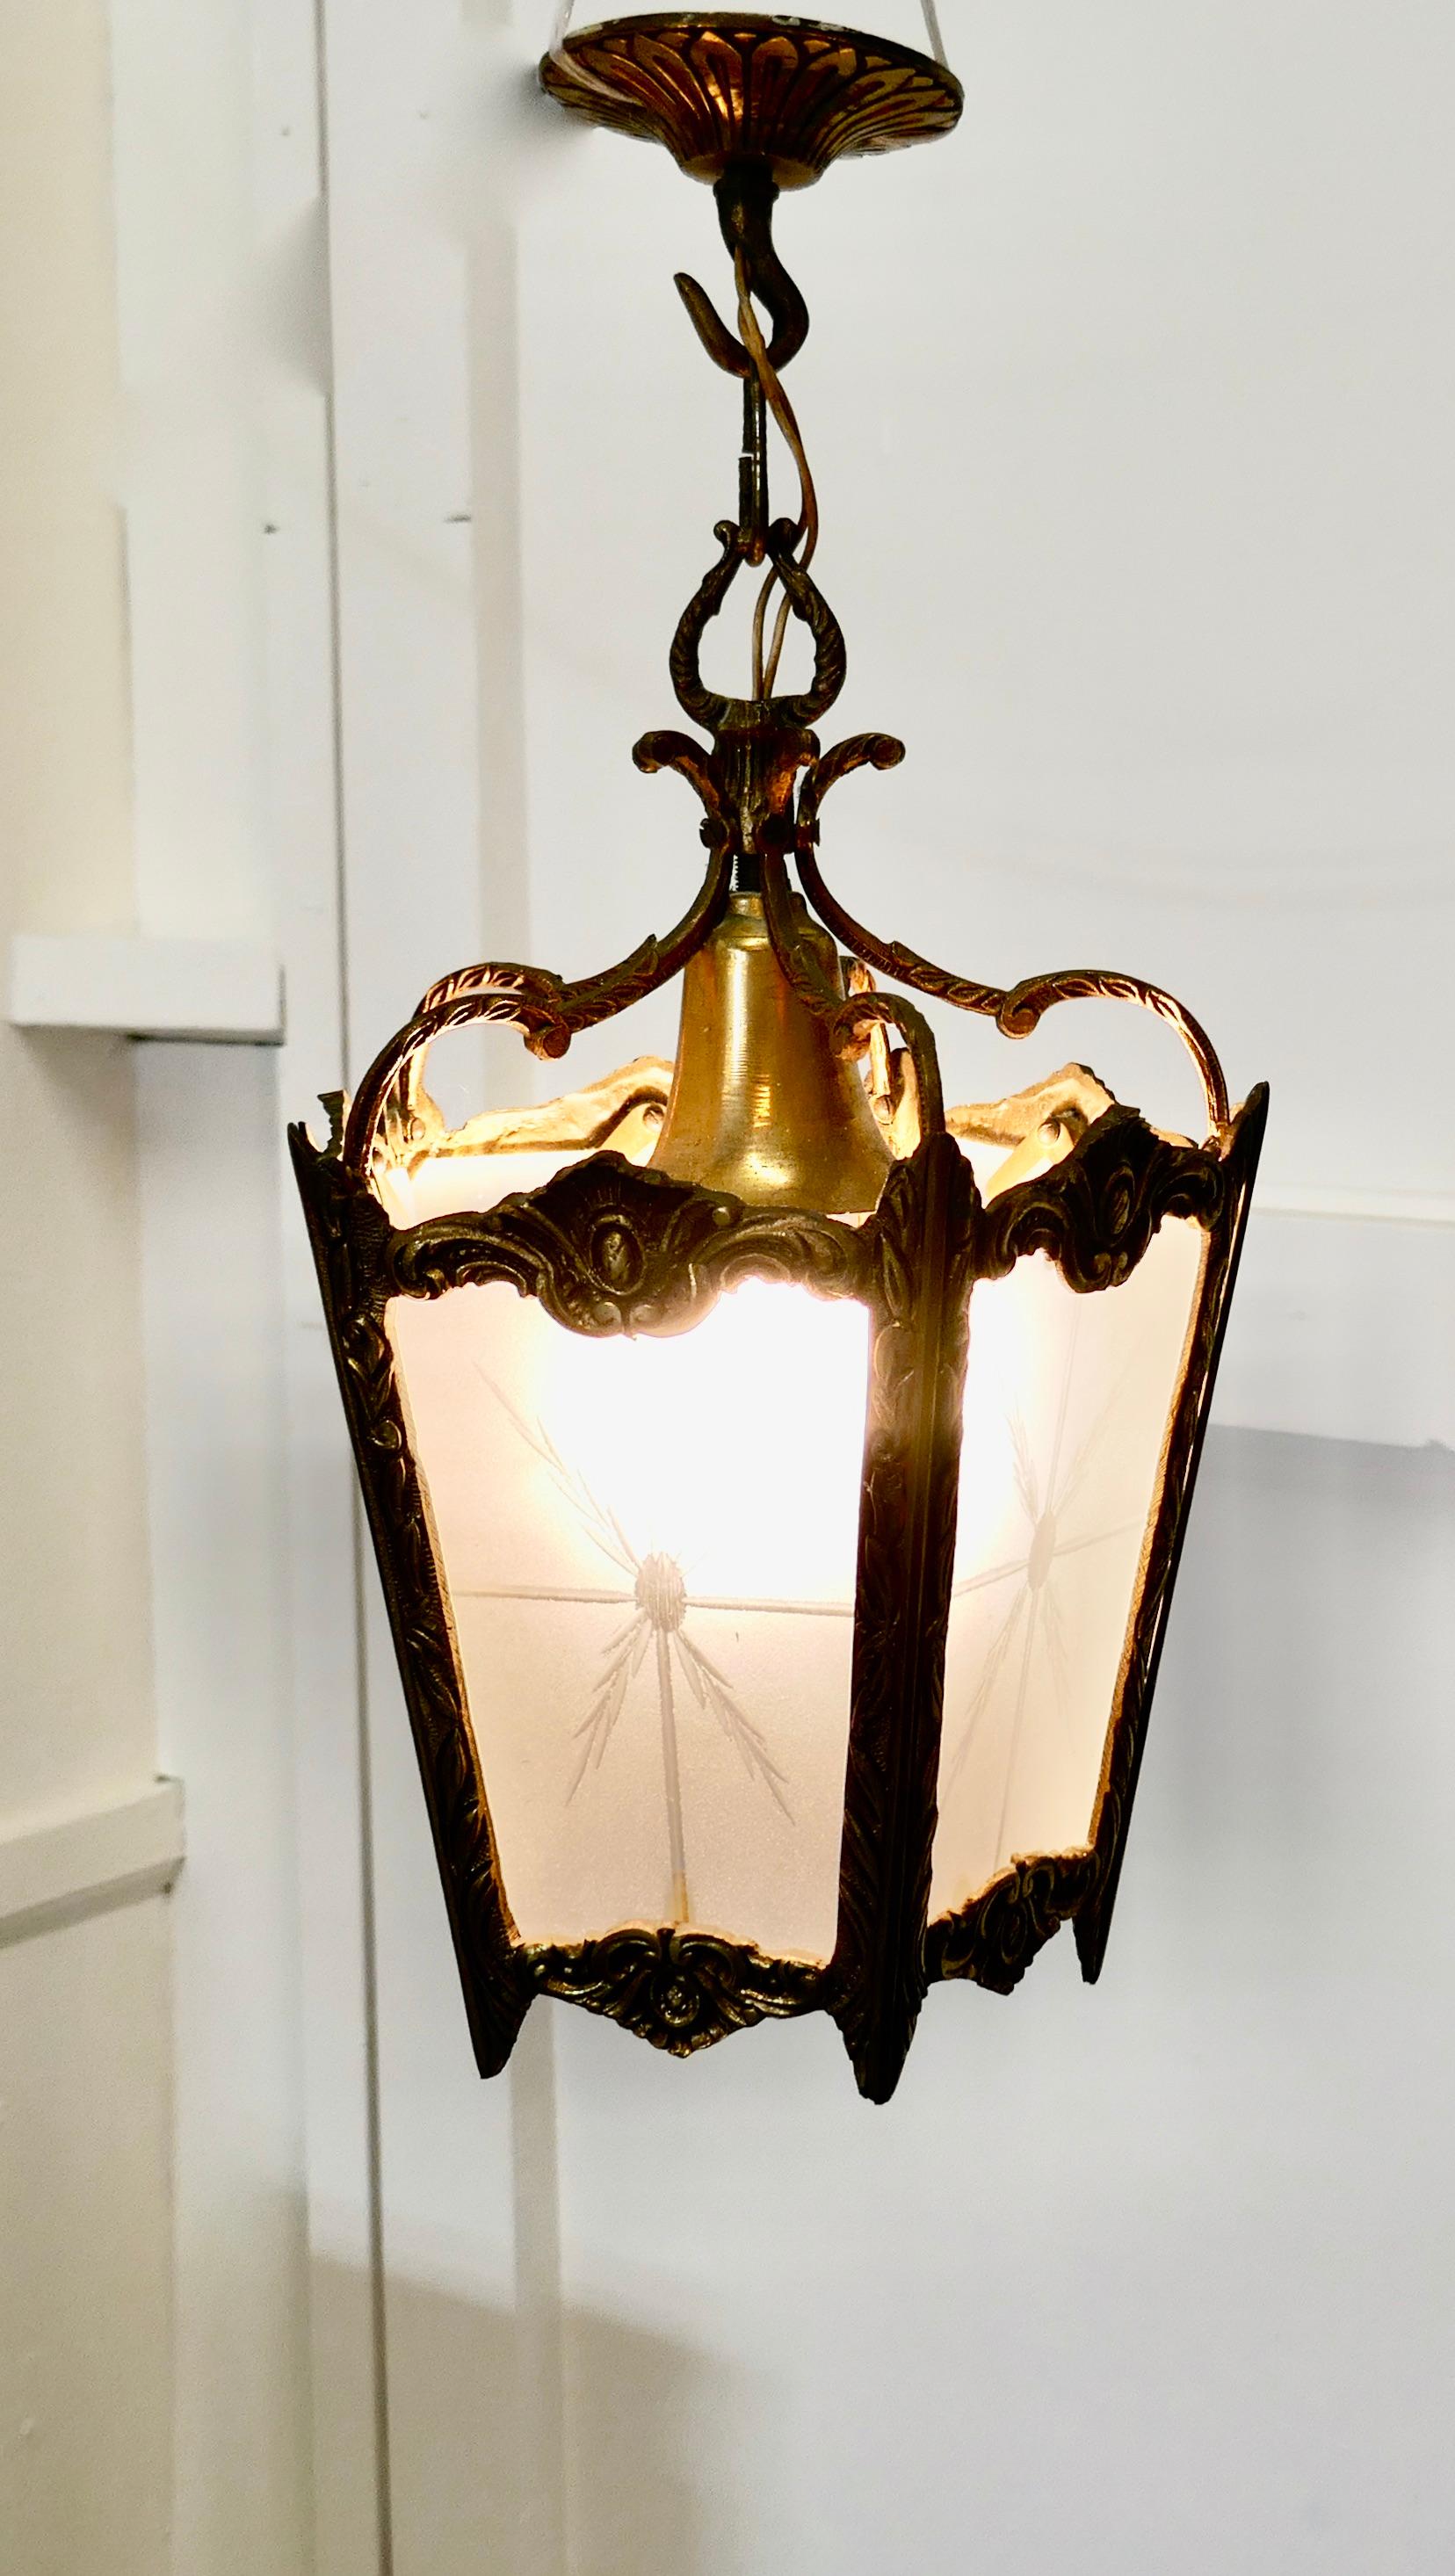 French brass and etched glass lantern hall light

A superb quality heavy brass lantern, the light has 5 glass panels, these are etched with a starburst

The lantern is decorated in the French style with ribbons and leaves and it hangs on a brass